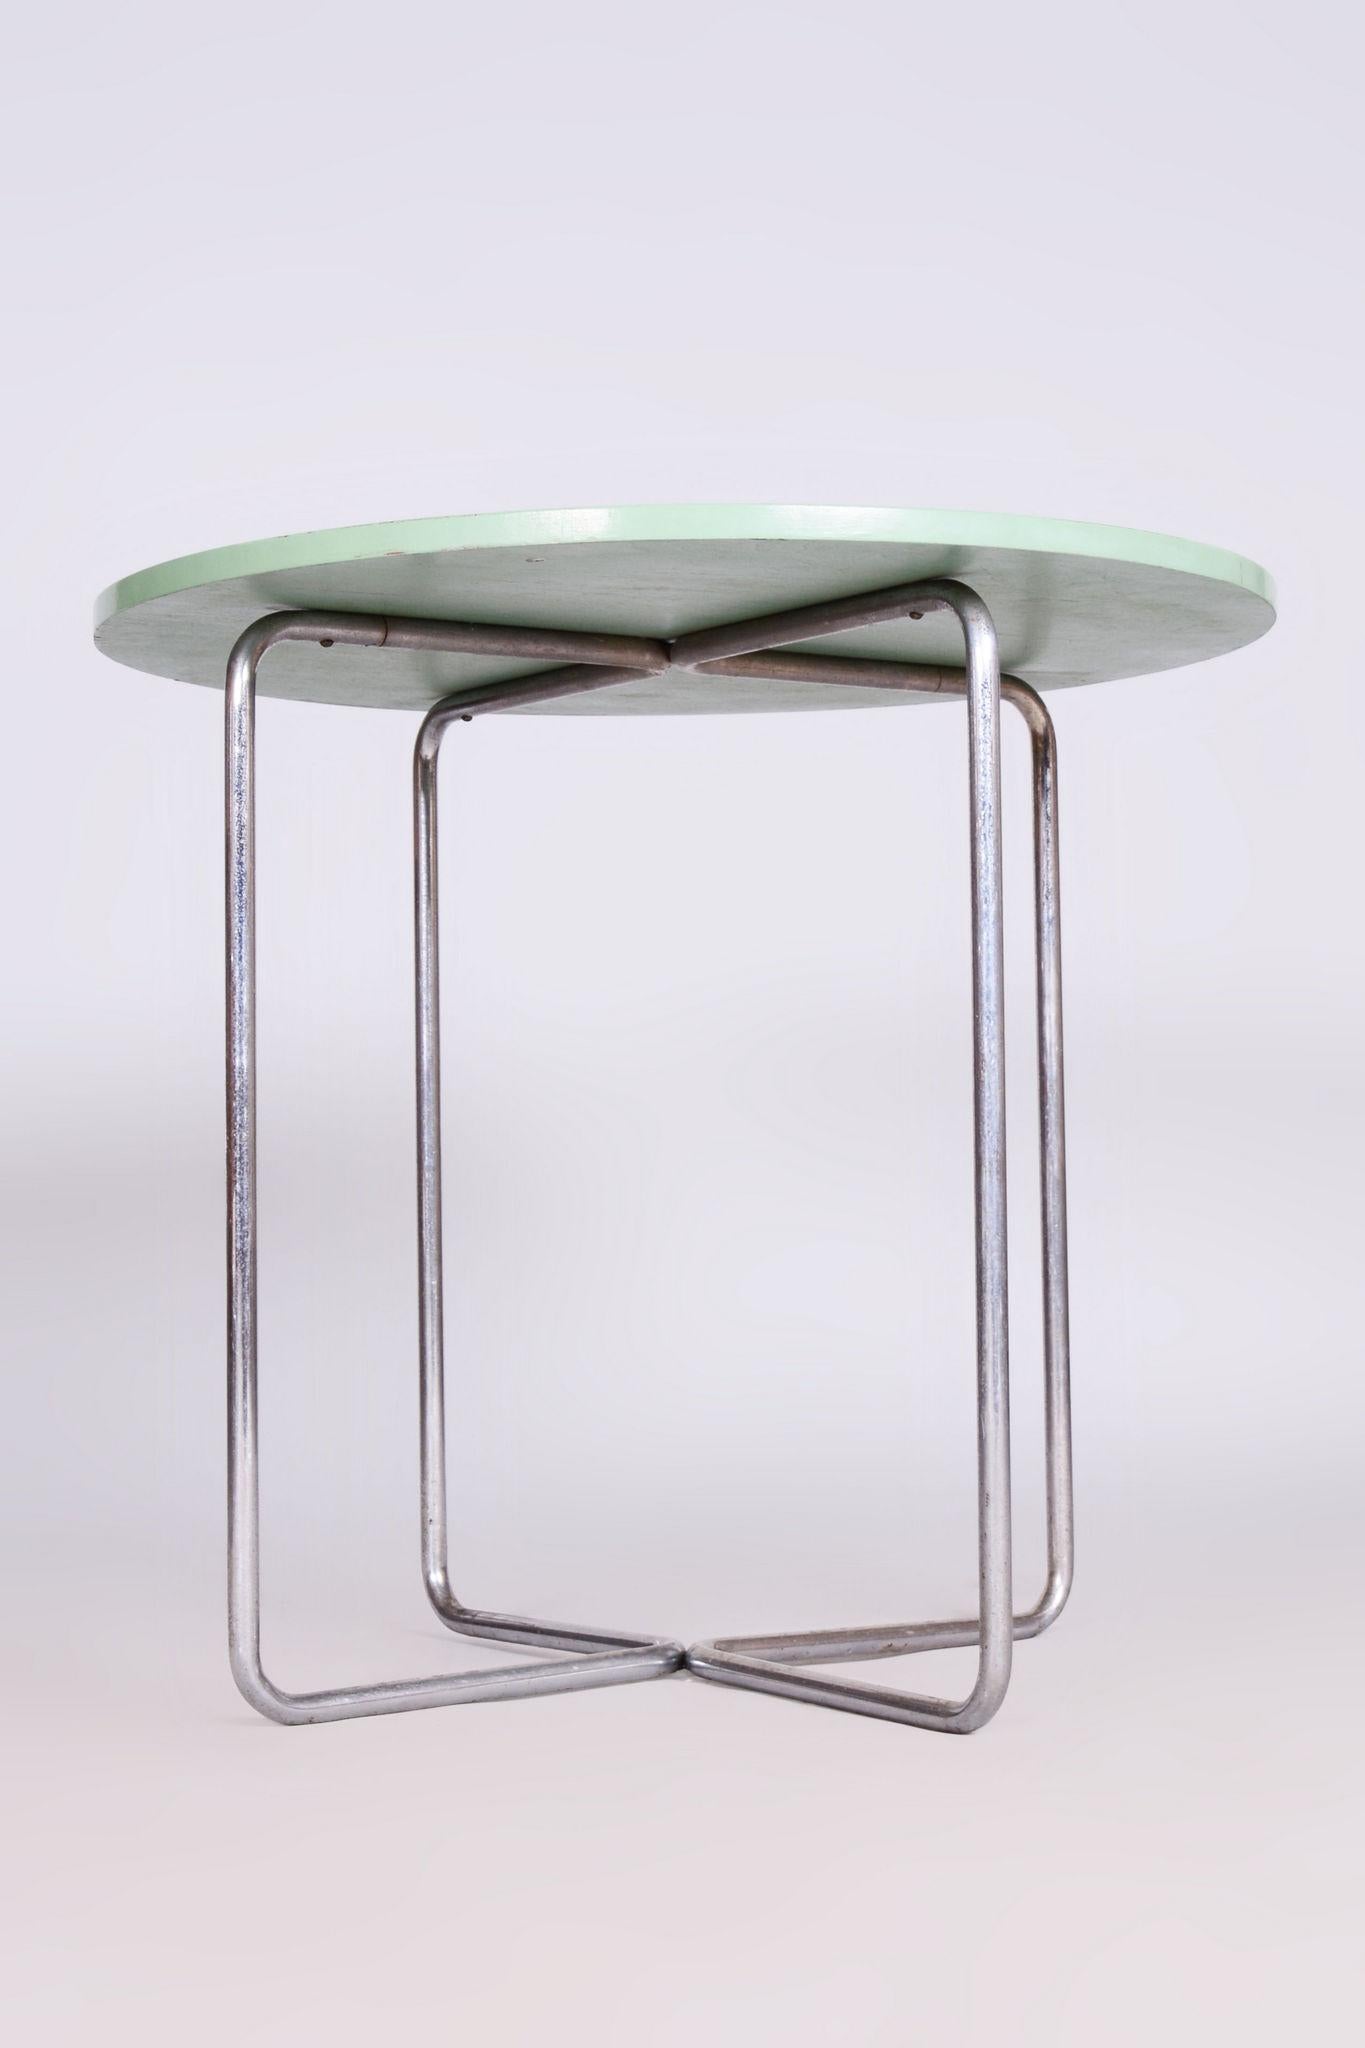 Mid-20th Century Restored Bauhaus Round Table, Chrome, Revived Polish, Czechia, 1930s For Sale